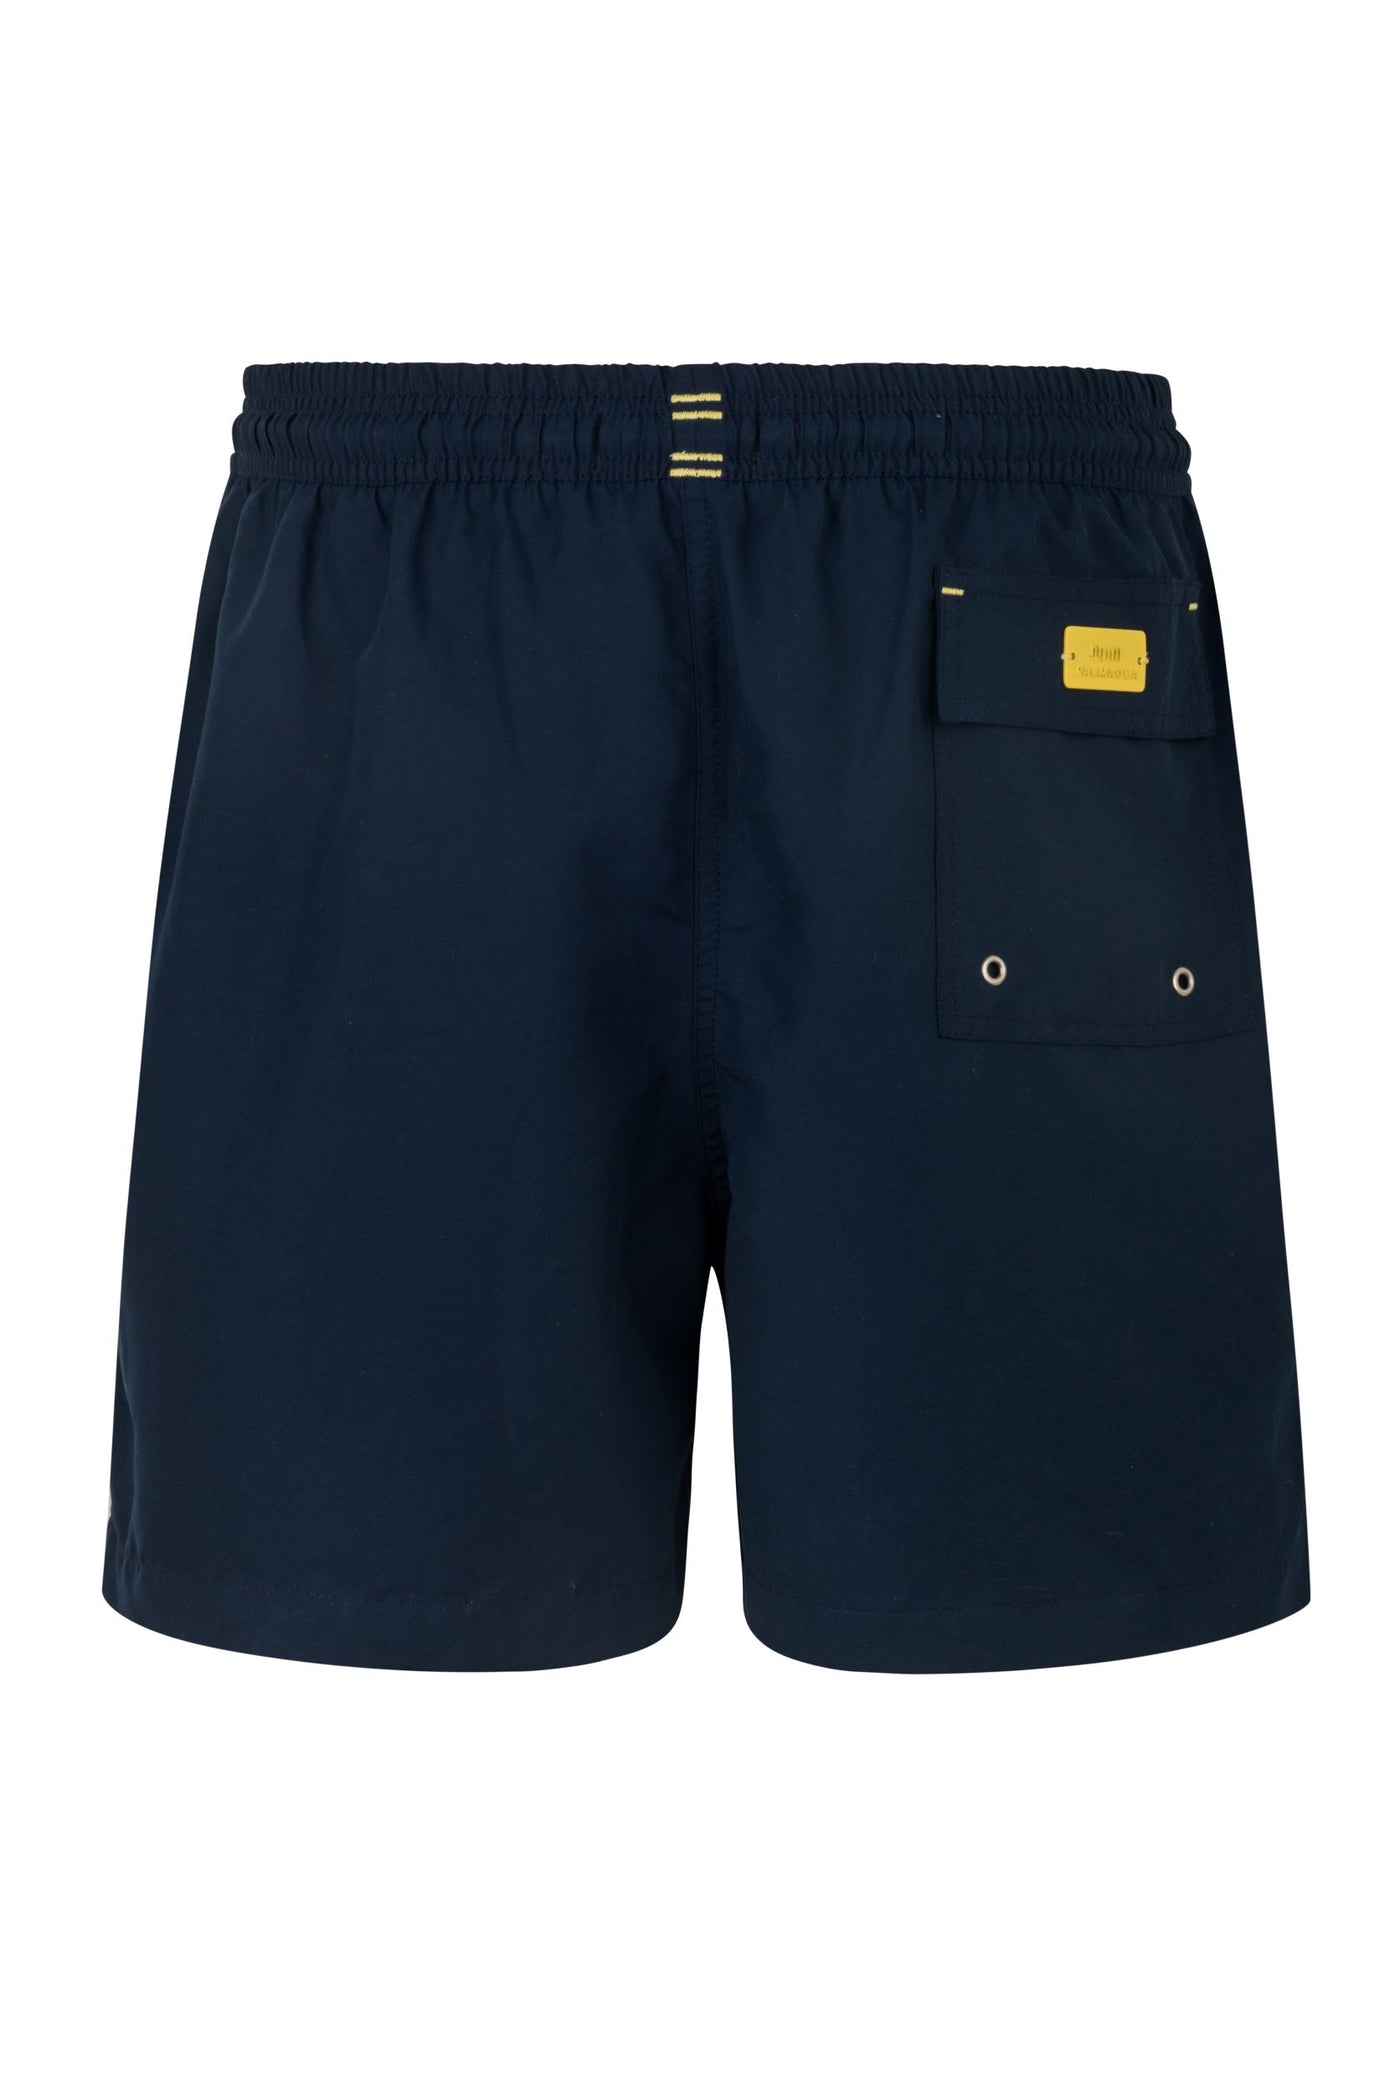 Fort Navy Trunk